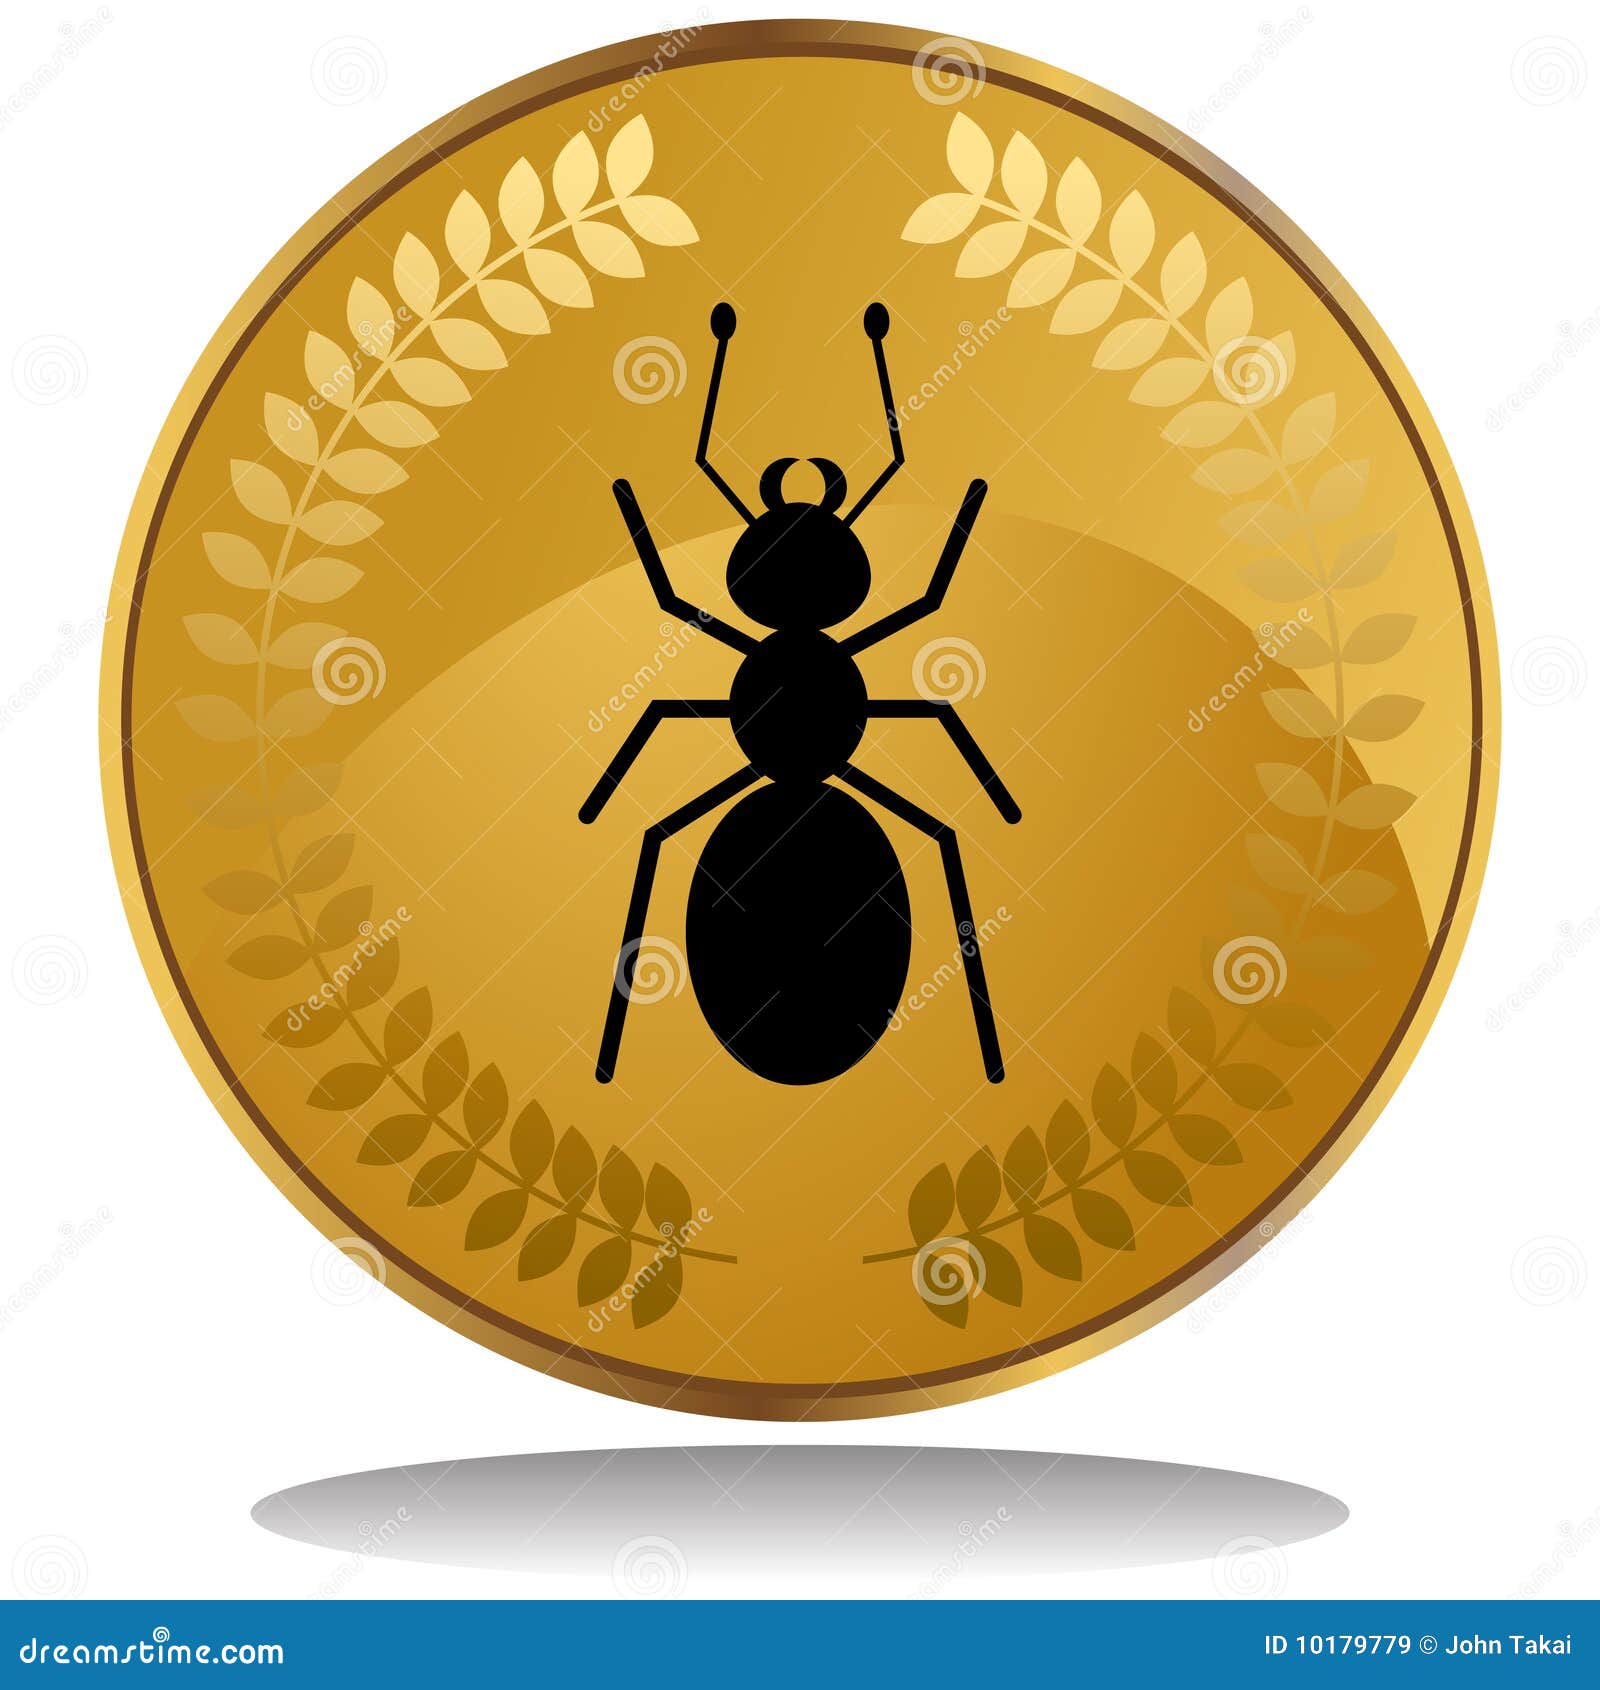 Gold Coin - Ant stock vector. Illustration of golden ...